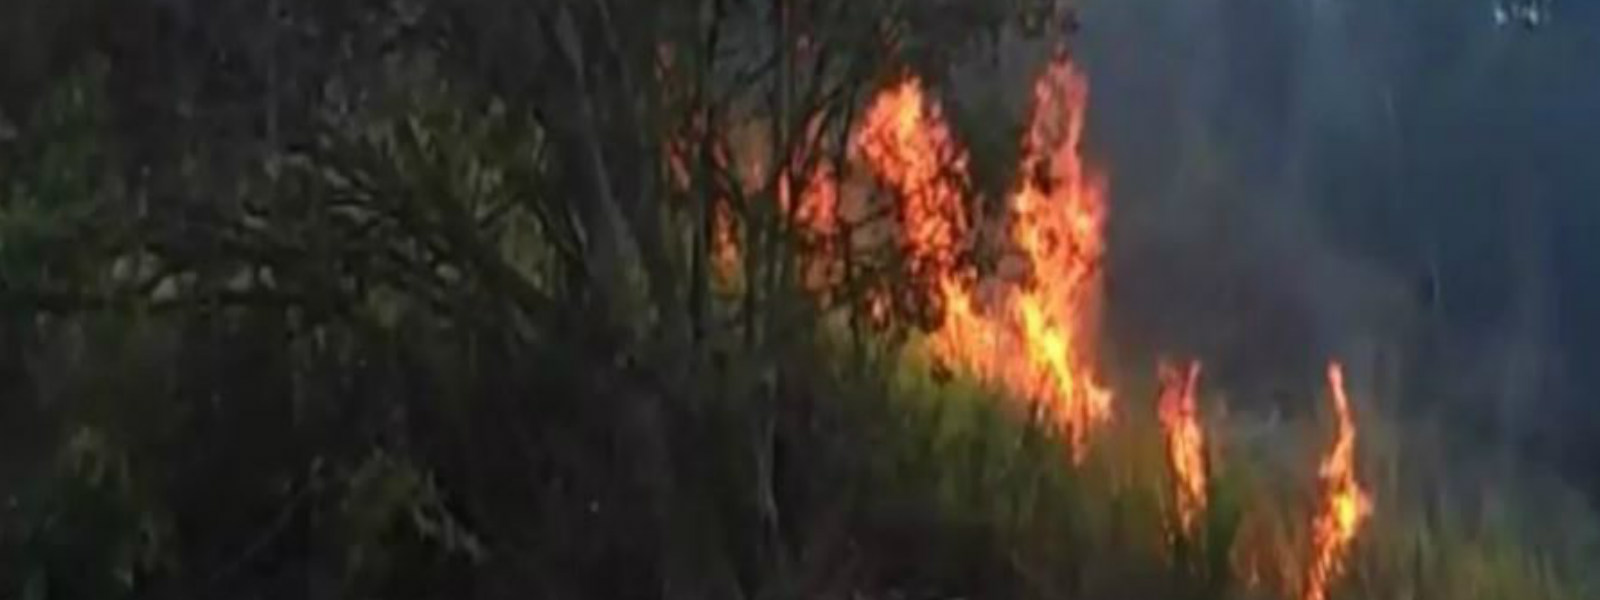 Deliberate forest fires reported in several areas